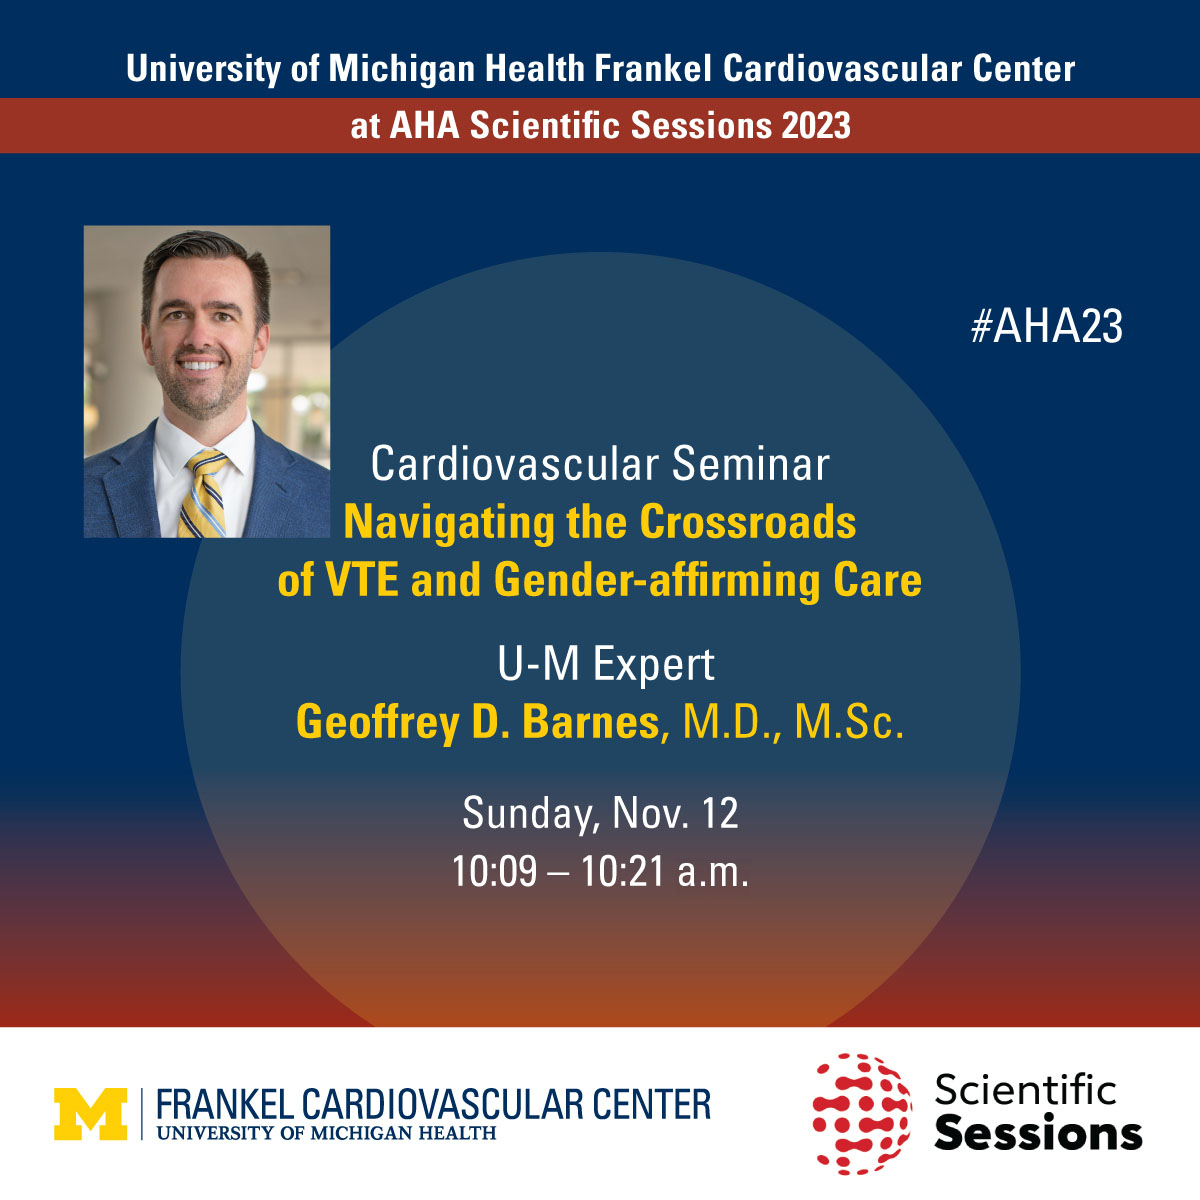 When caring for #transgender patients who have had a blood clot, special cardiovascular risks must be considered when they begin gender-affirming therapy. Join @GBarnesMD tomorrow morning at #AHA23 to learn more. #VTE #CardioTwitter